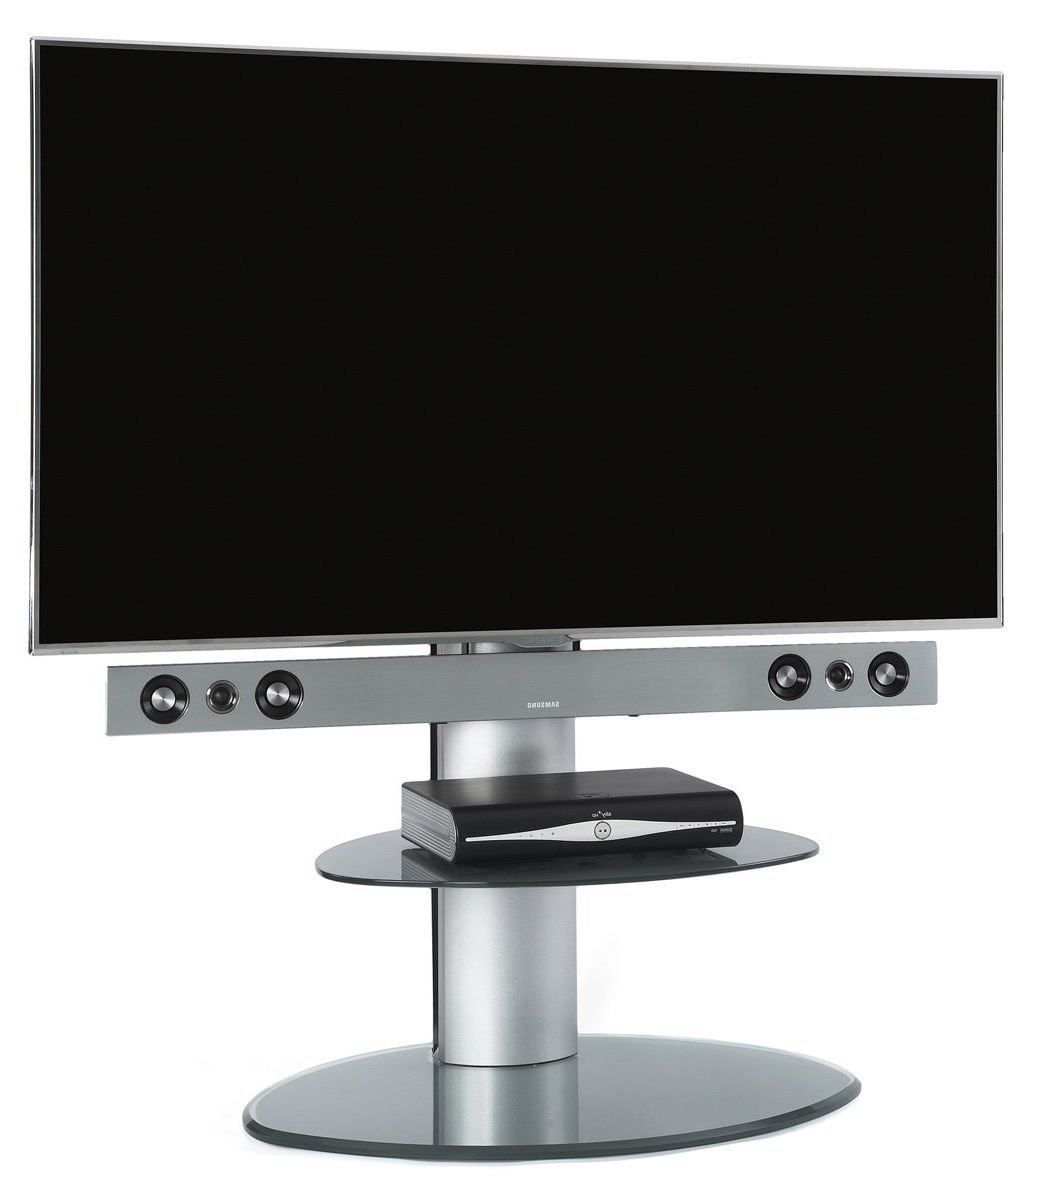 Off The Wall Soundbar Bracket Stand Accessory Pertaining To Most Current Bracketed Tv Stands (View 9 of 20)